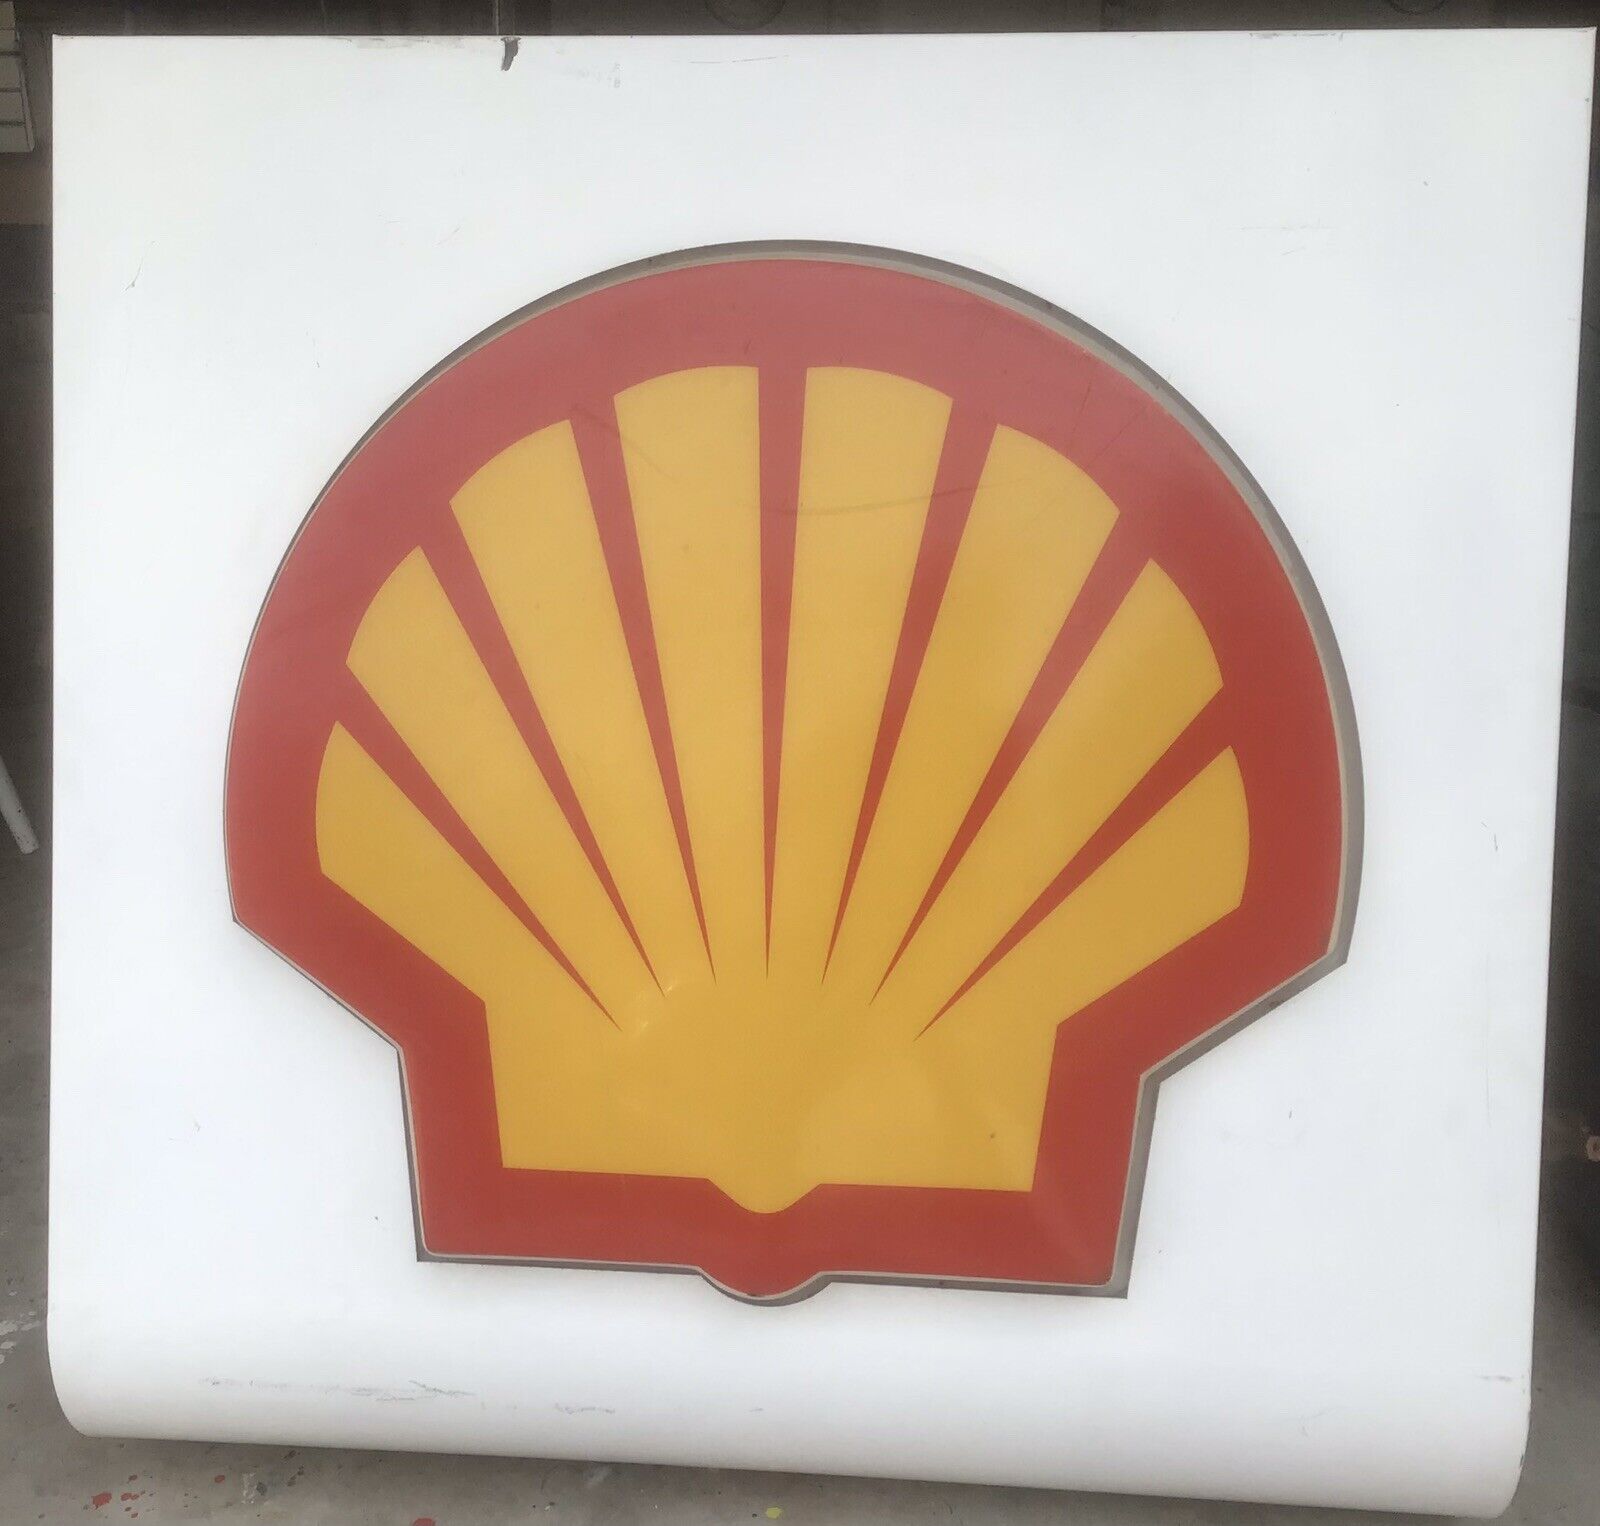 VERY LARGE SHELL LIGHTED SIGN